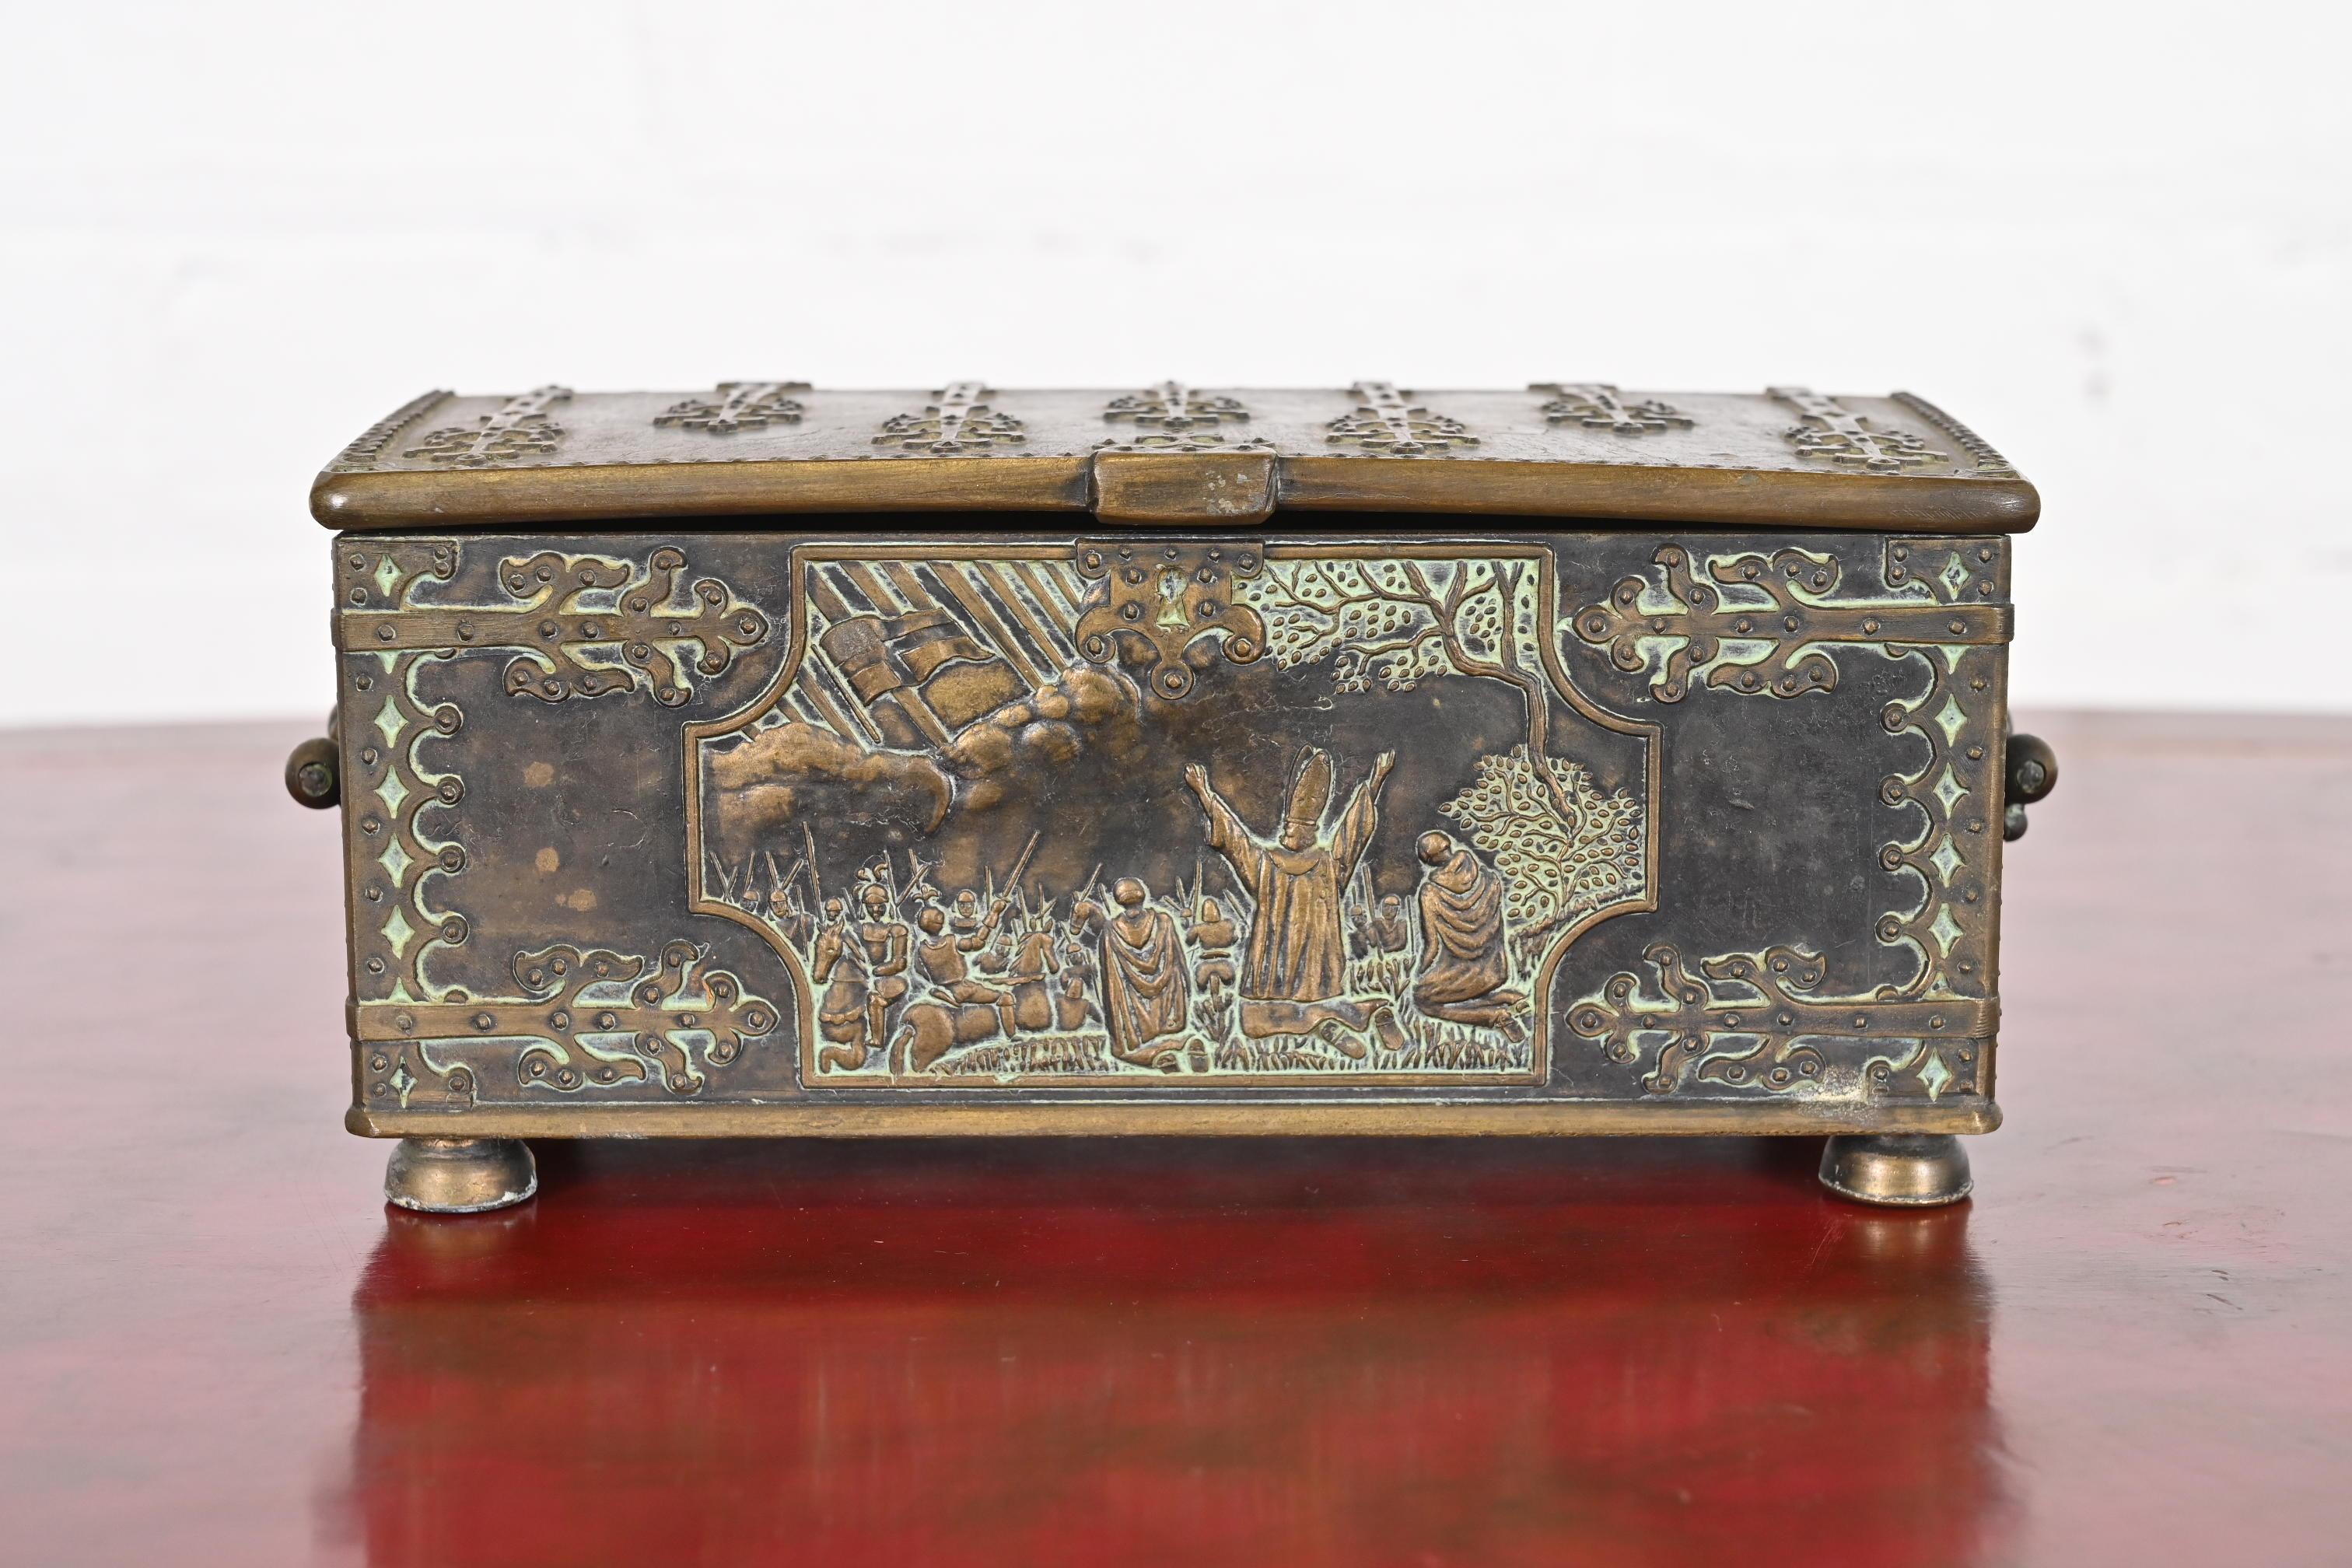 A beautiful casket form cast iron and bronze dresser box, jewelry box, cigar box, or decorative box with interior cedar lining. The front depicts a scene from the 1219 Battle of Lyndanisse, during the Estonian Crusade of King Valdemar II of